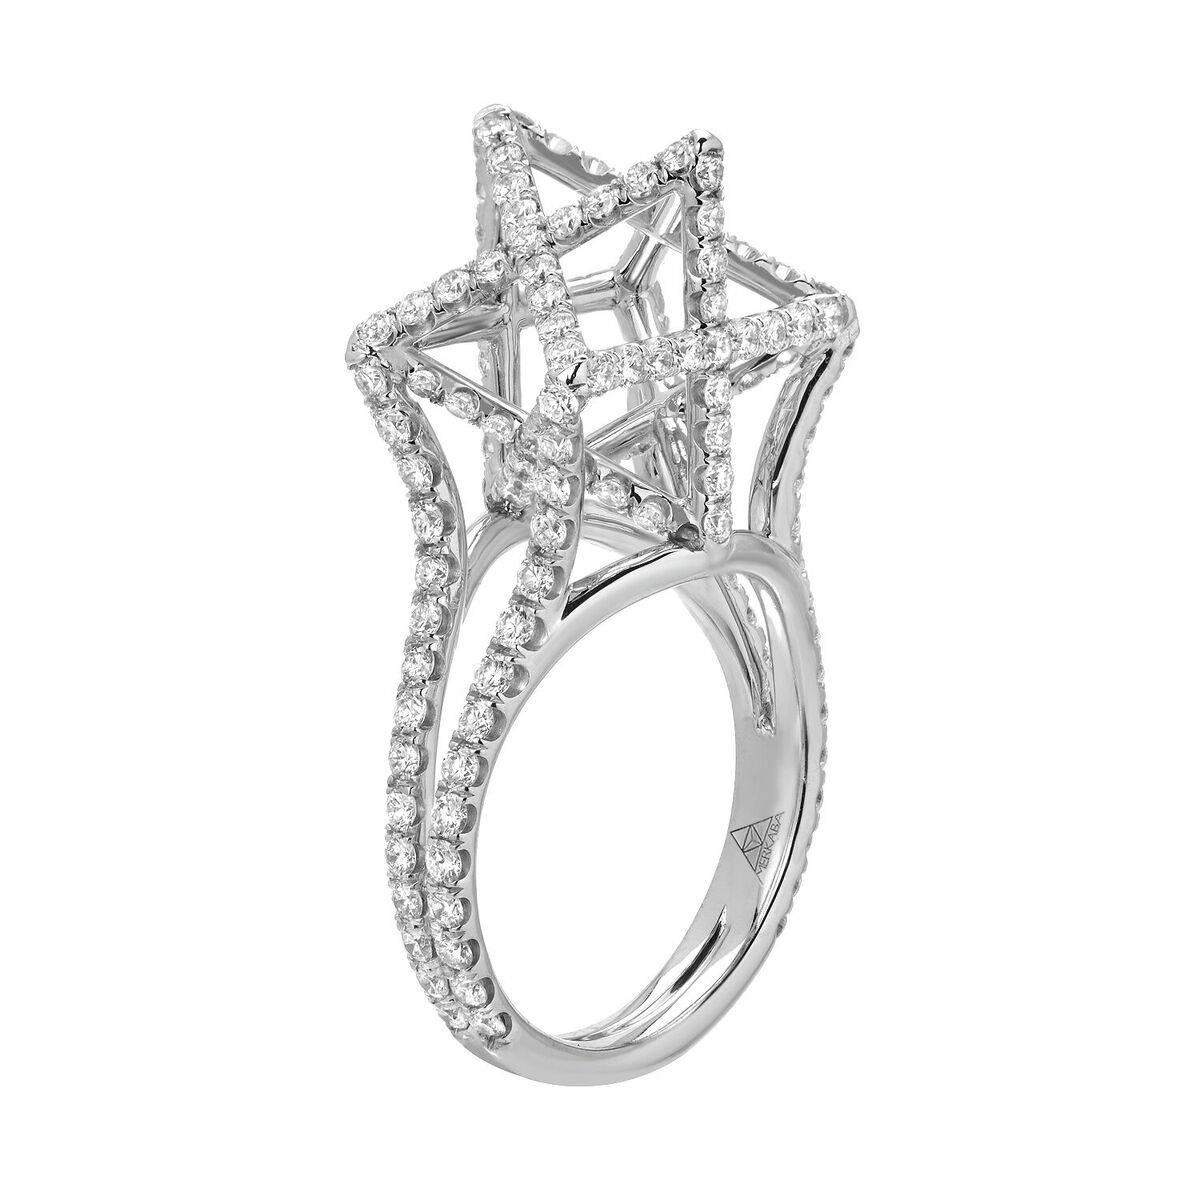 Platinum Diamond Ring - Architectural Merkaba star platinum diamond ring, featuring a total of approximately 2.02 carats of round brilliant diamonds, F-G color and VVS2-VS1 clarity. This dramatic diamond platinum ring design extends upward from the